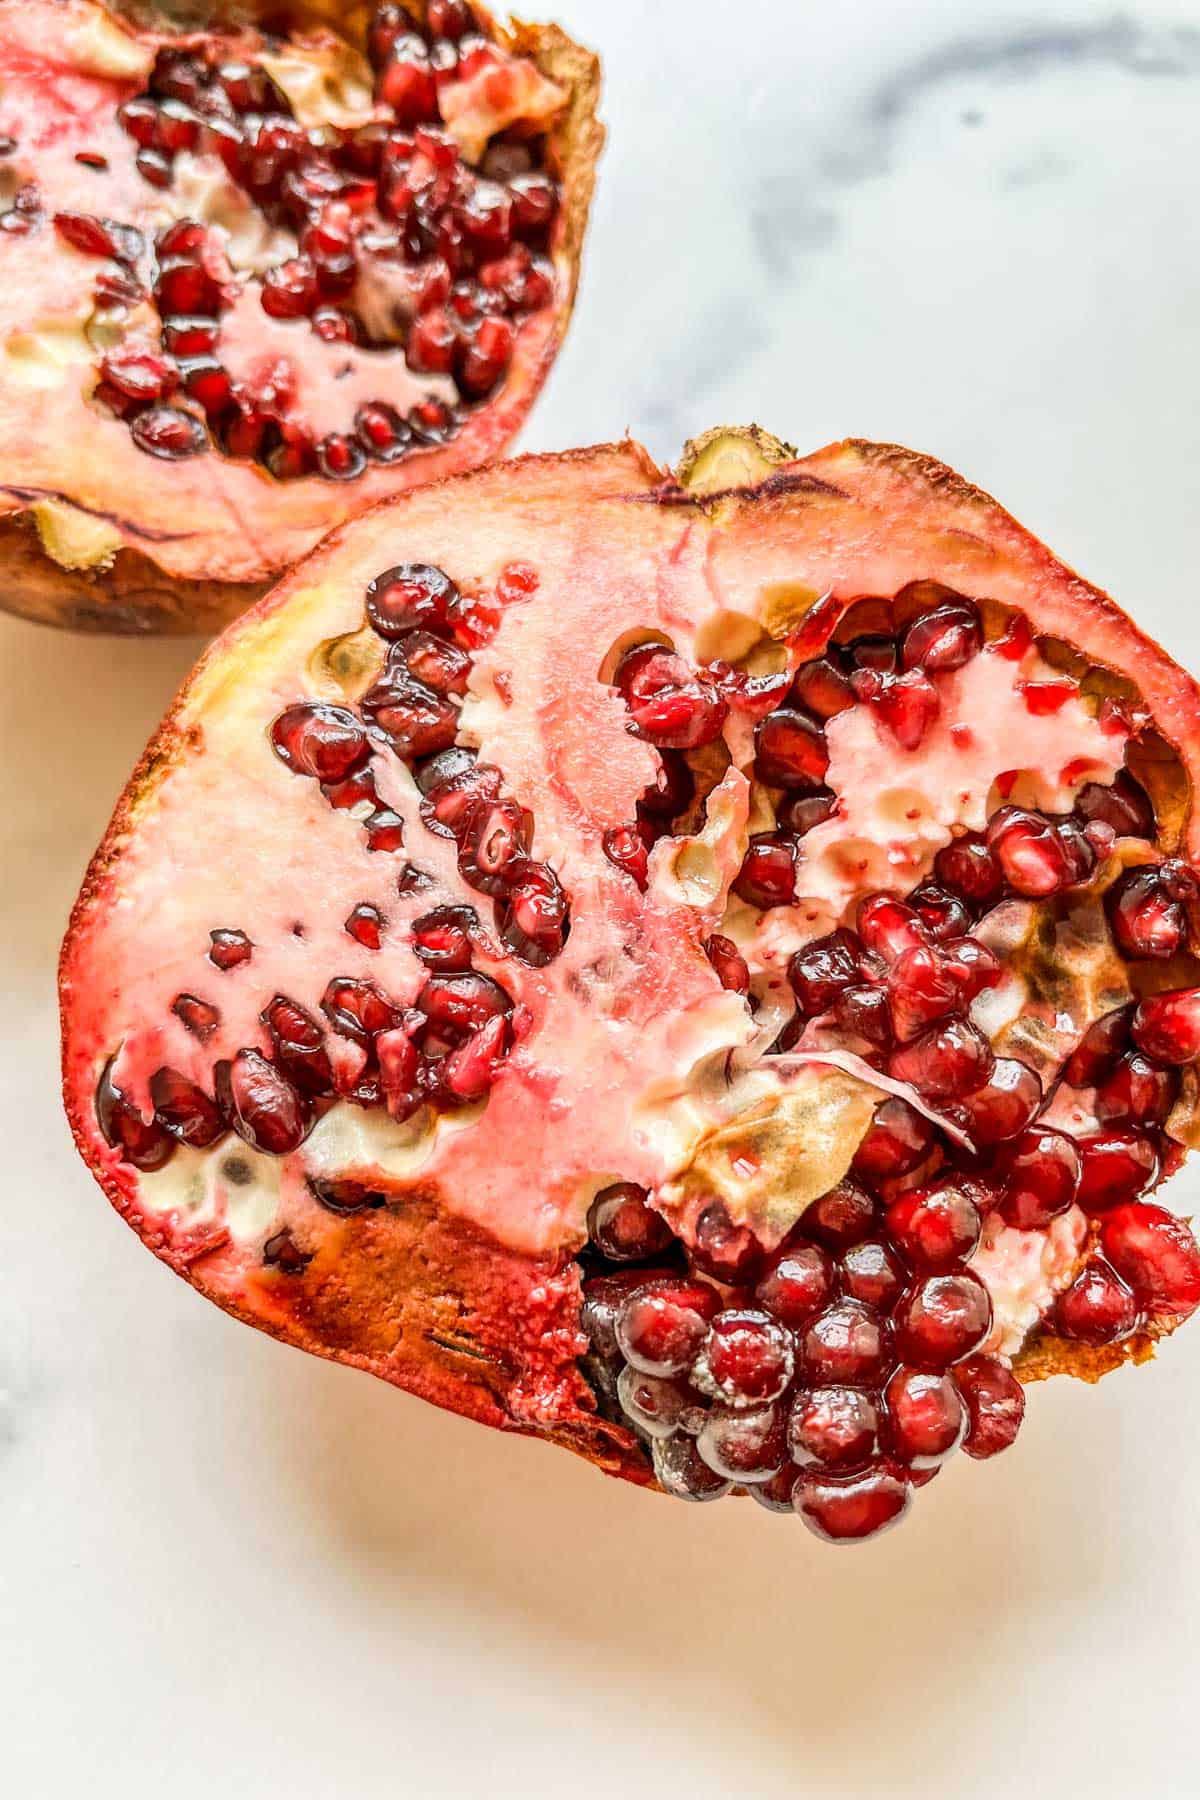 Pomegranate with mold on arils.